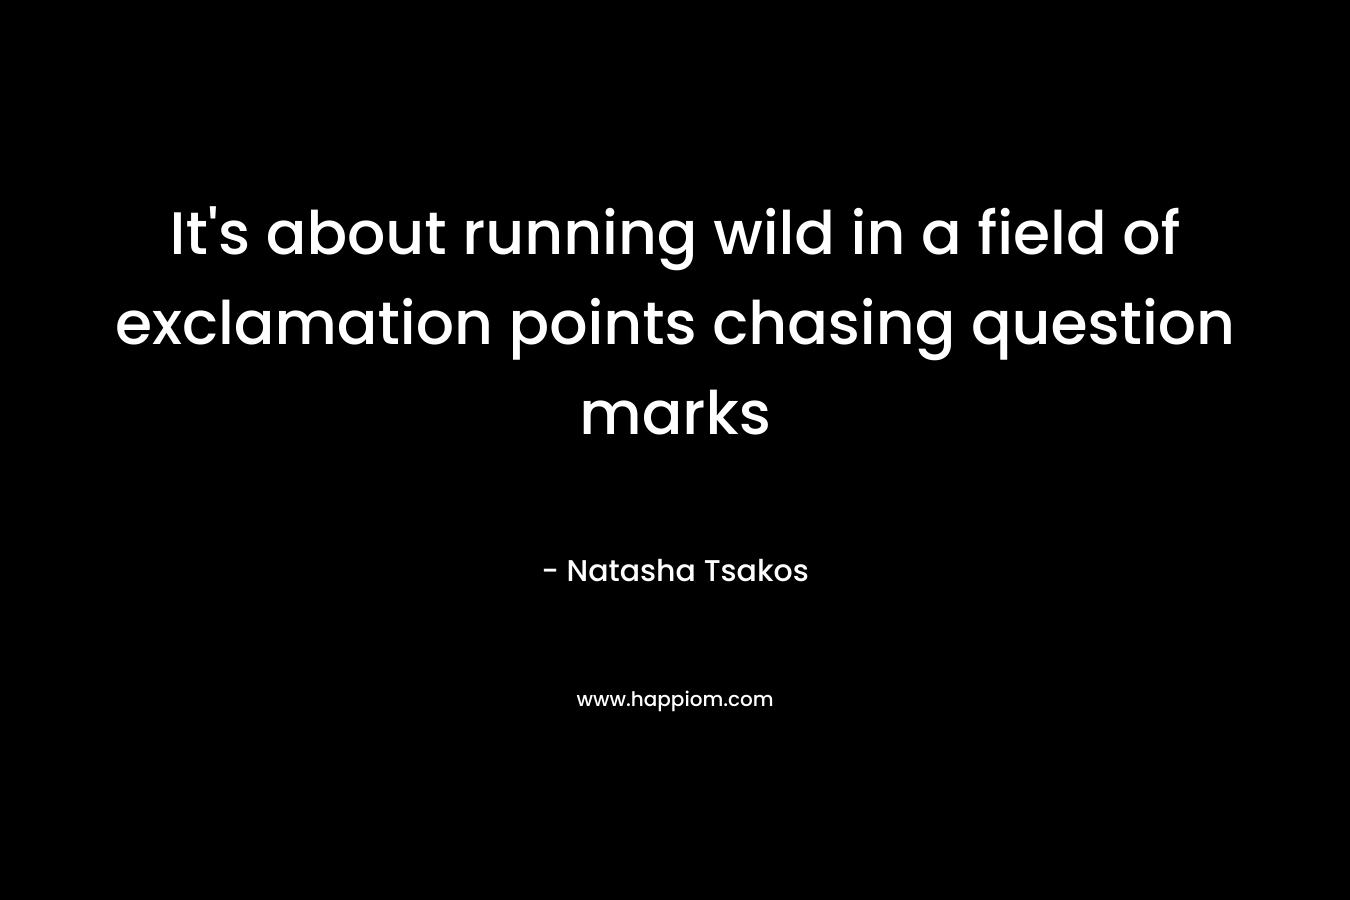 It’s about running wild in a field of exclamation points chasing question marks – Natasha Tsakos